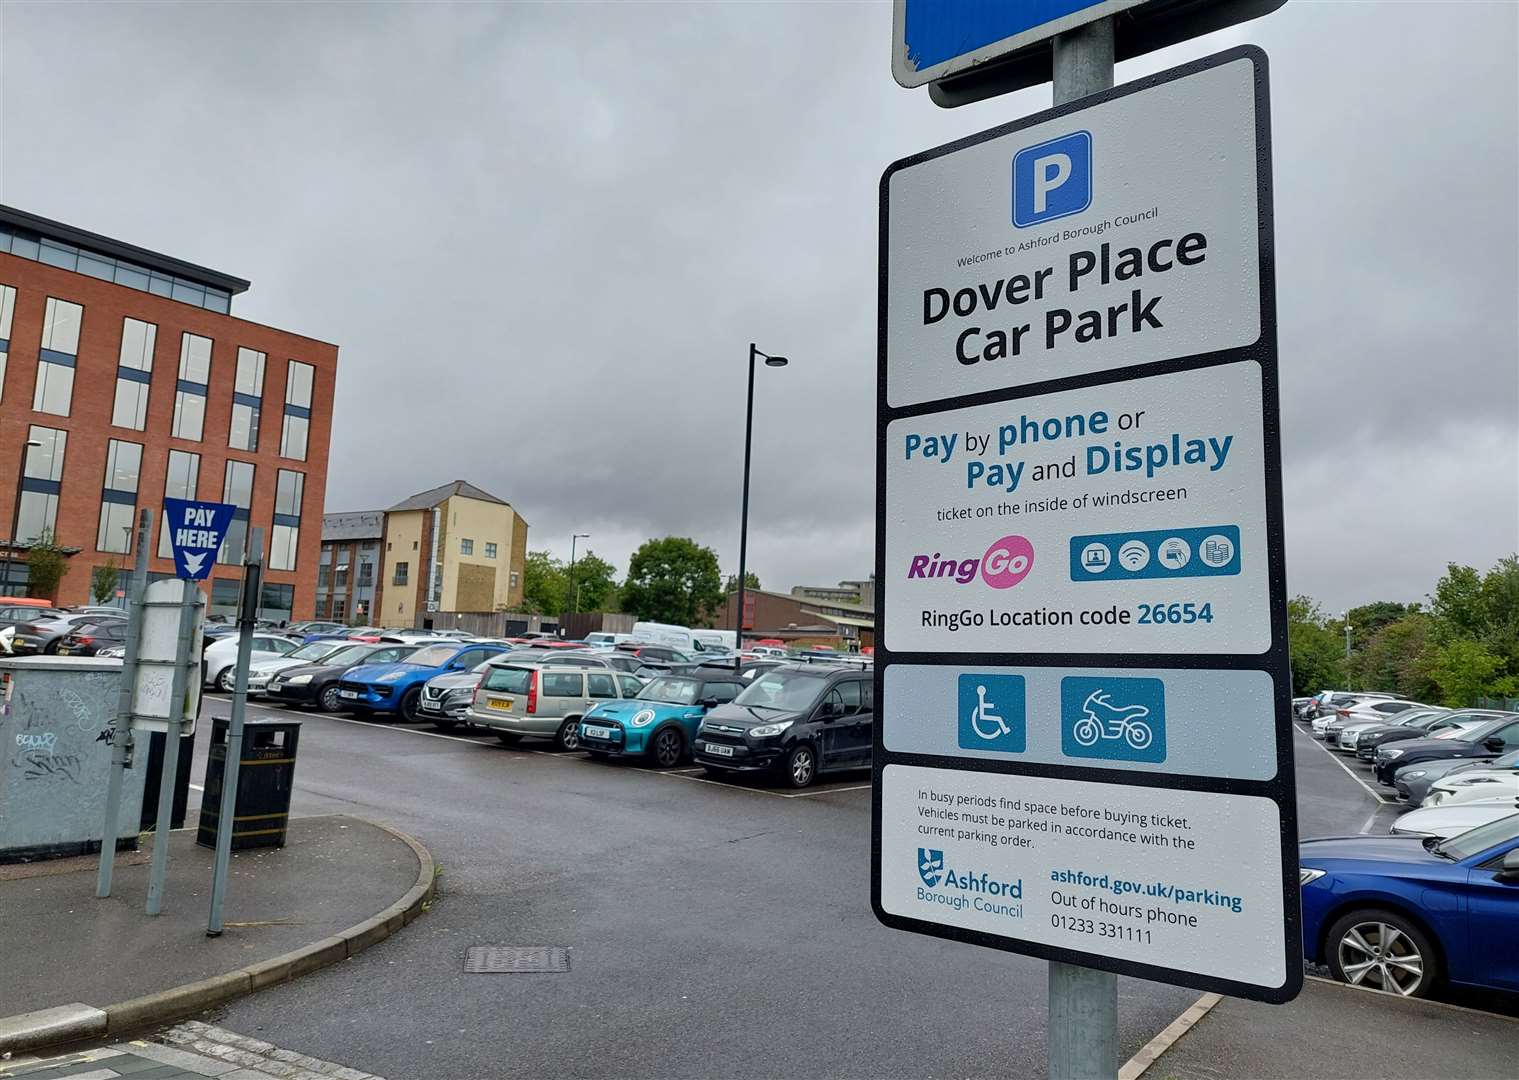 Parking charges across the Ashford borough will increase in October